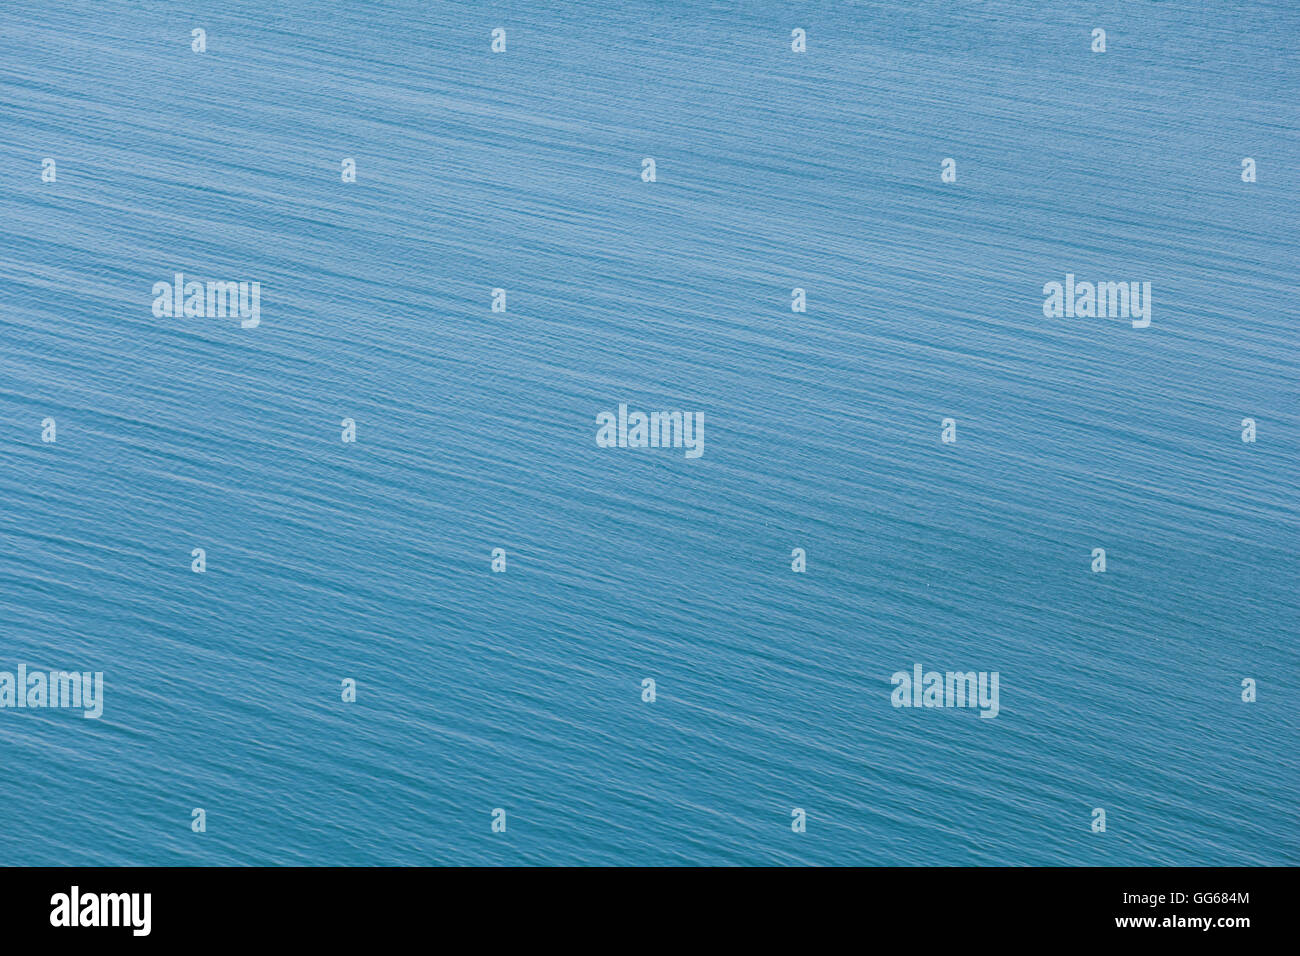 Image of smooth sea water with very small waves from the air as background Stock Photo